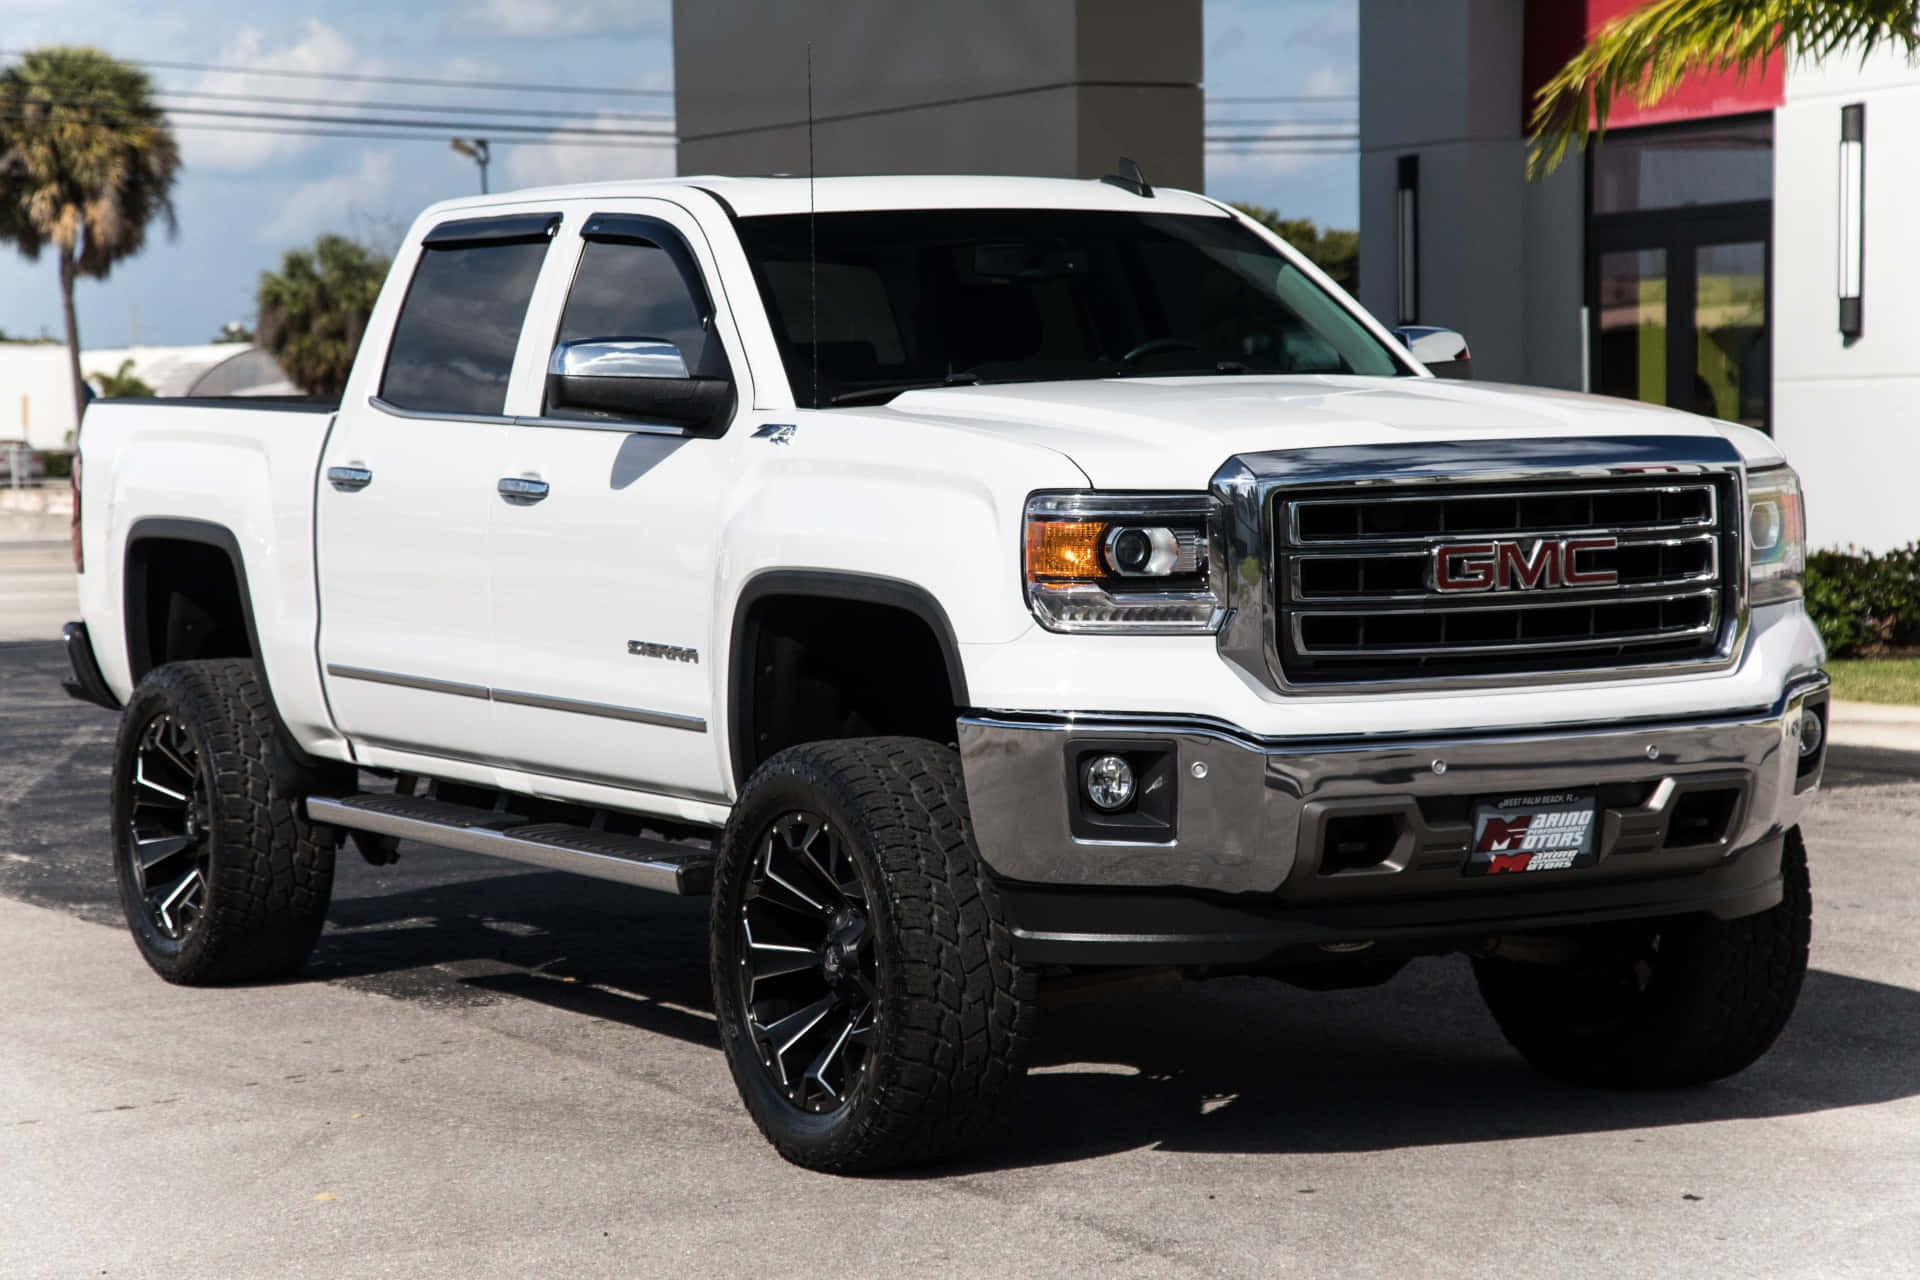 A White Gmc Sierra Parked In Front Of A Building